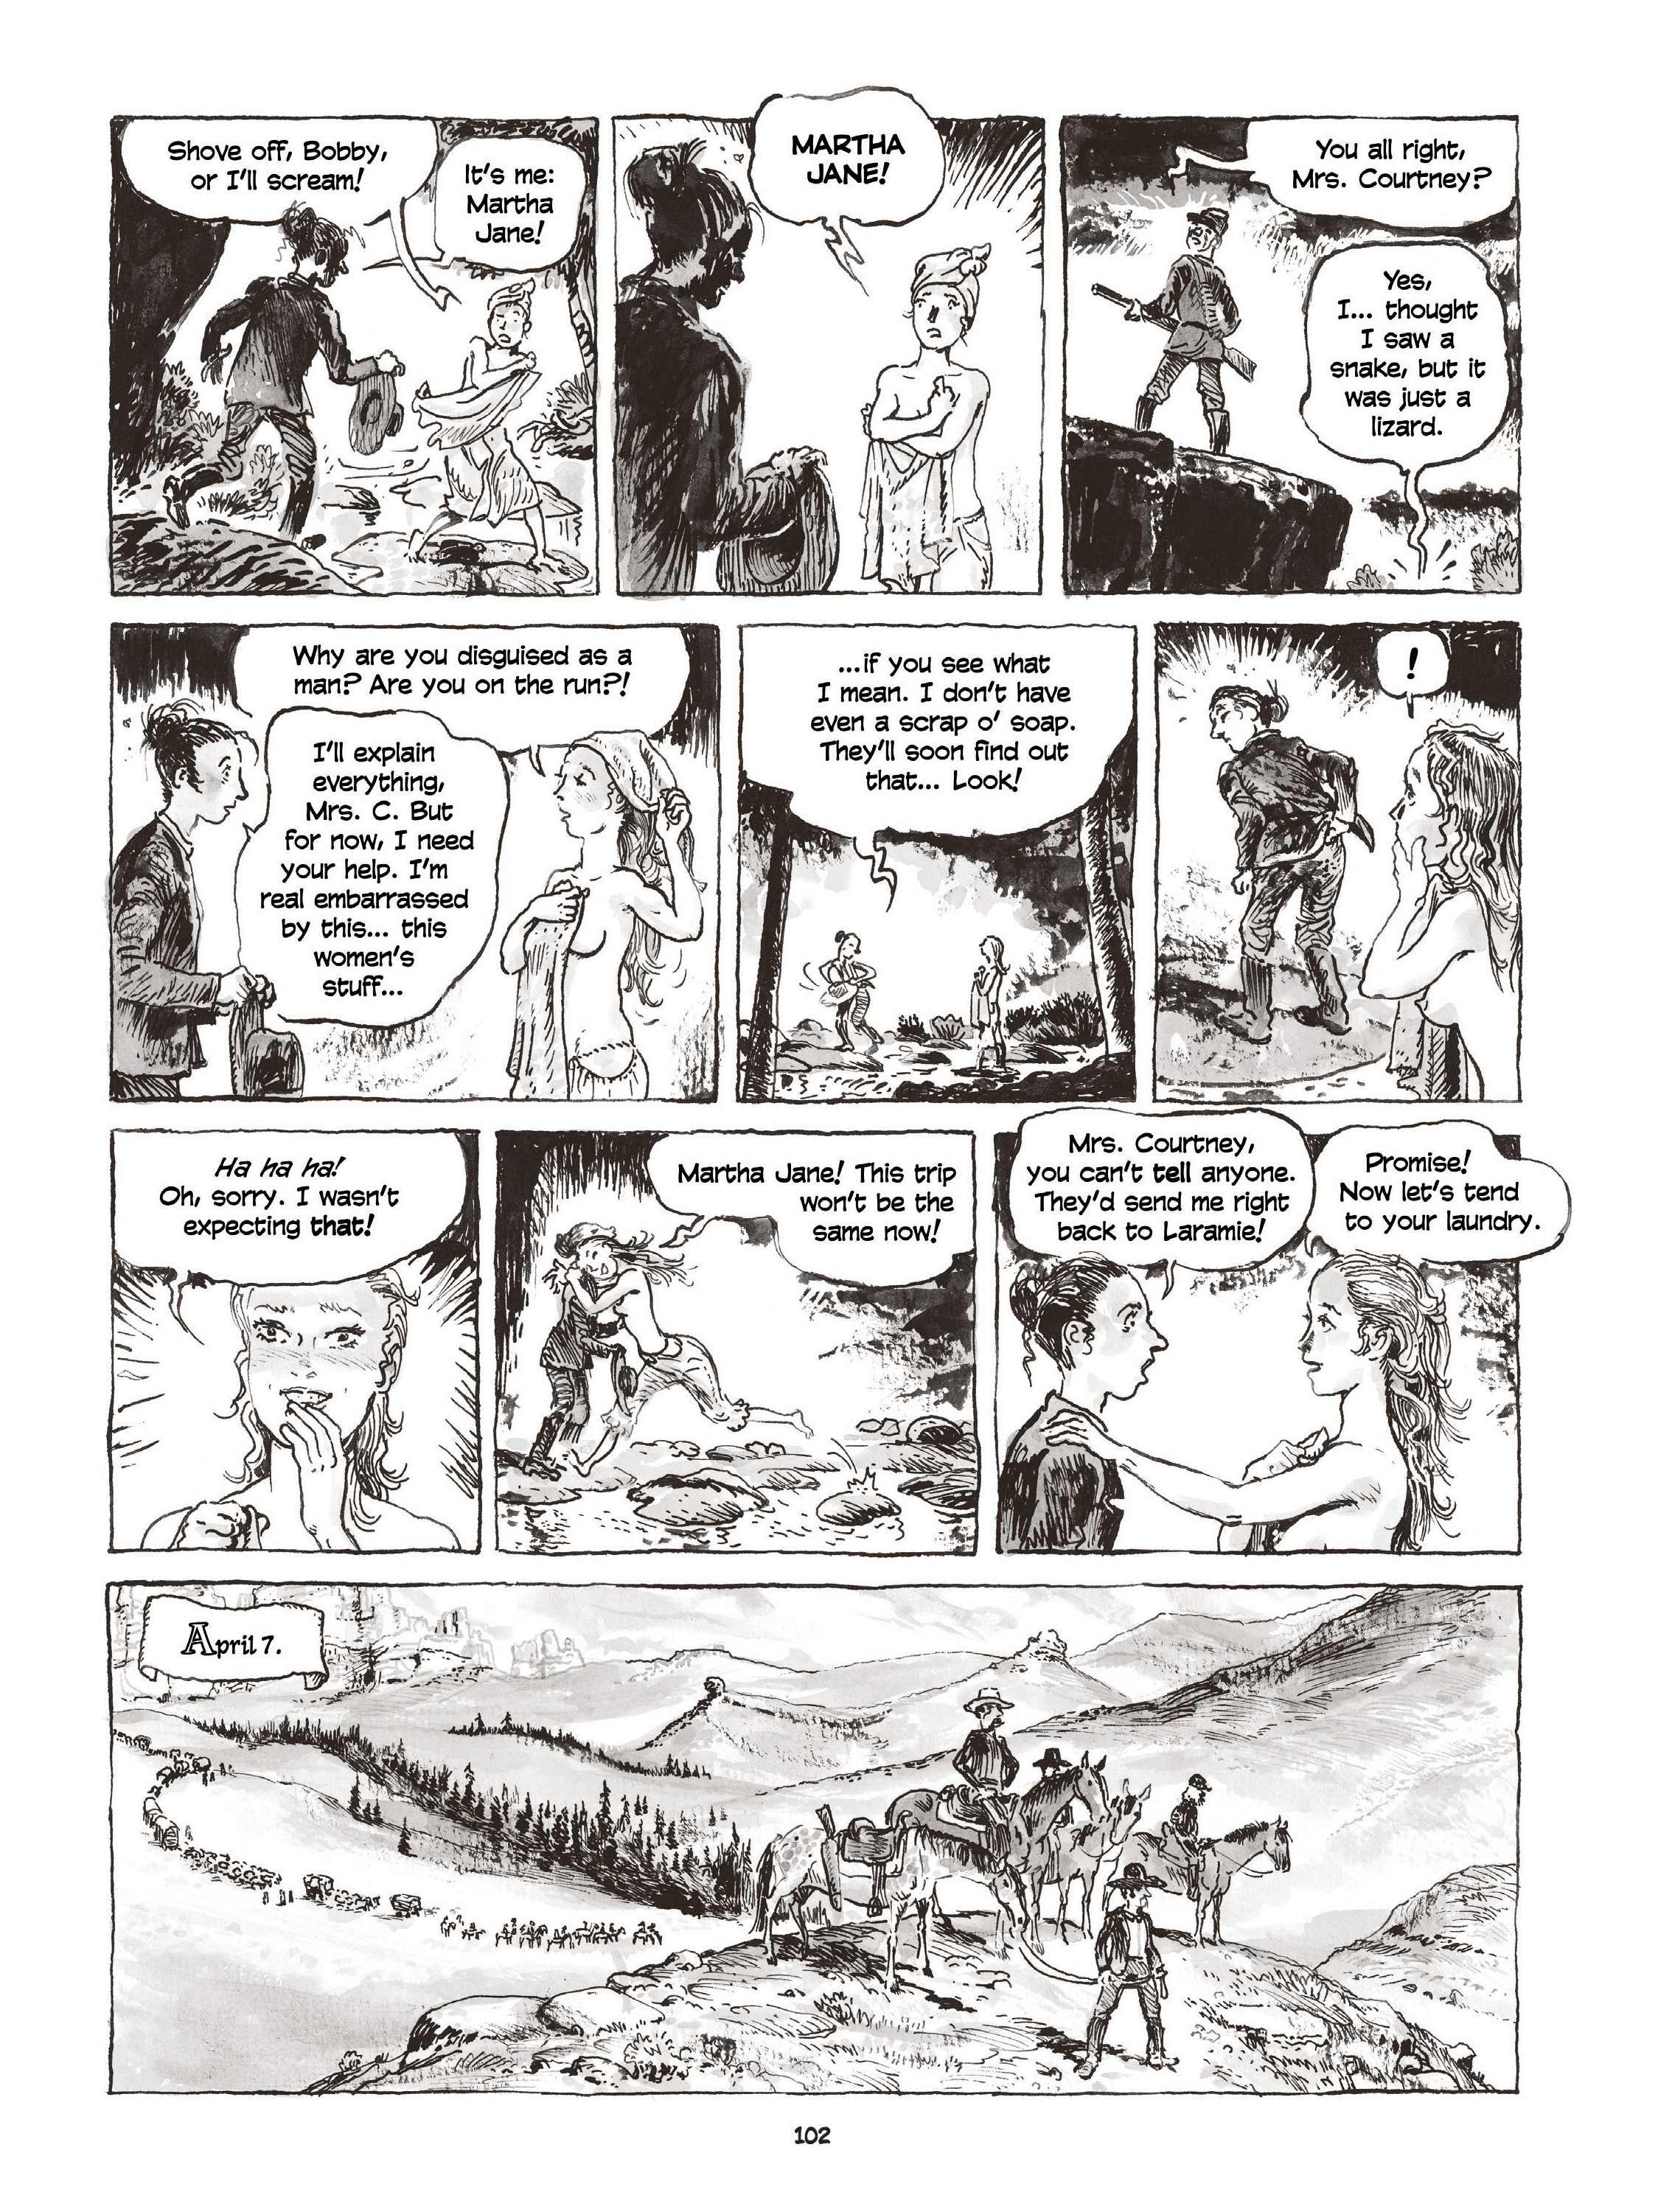 Read online Calamity Jane: The Calamitous Life of Martha Jane Cannary comic -  Issue # TPB (Part 2) - 3